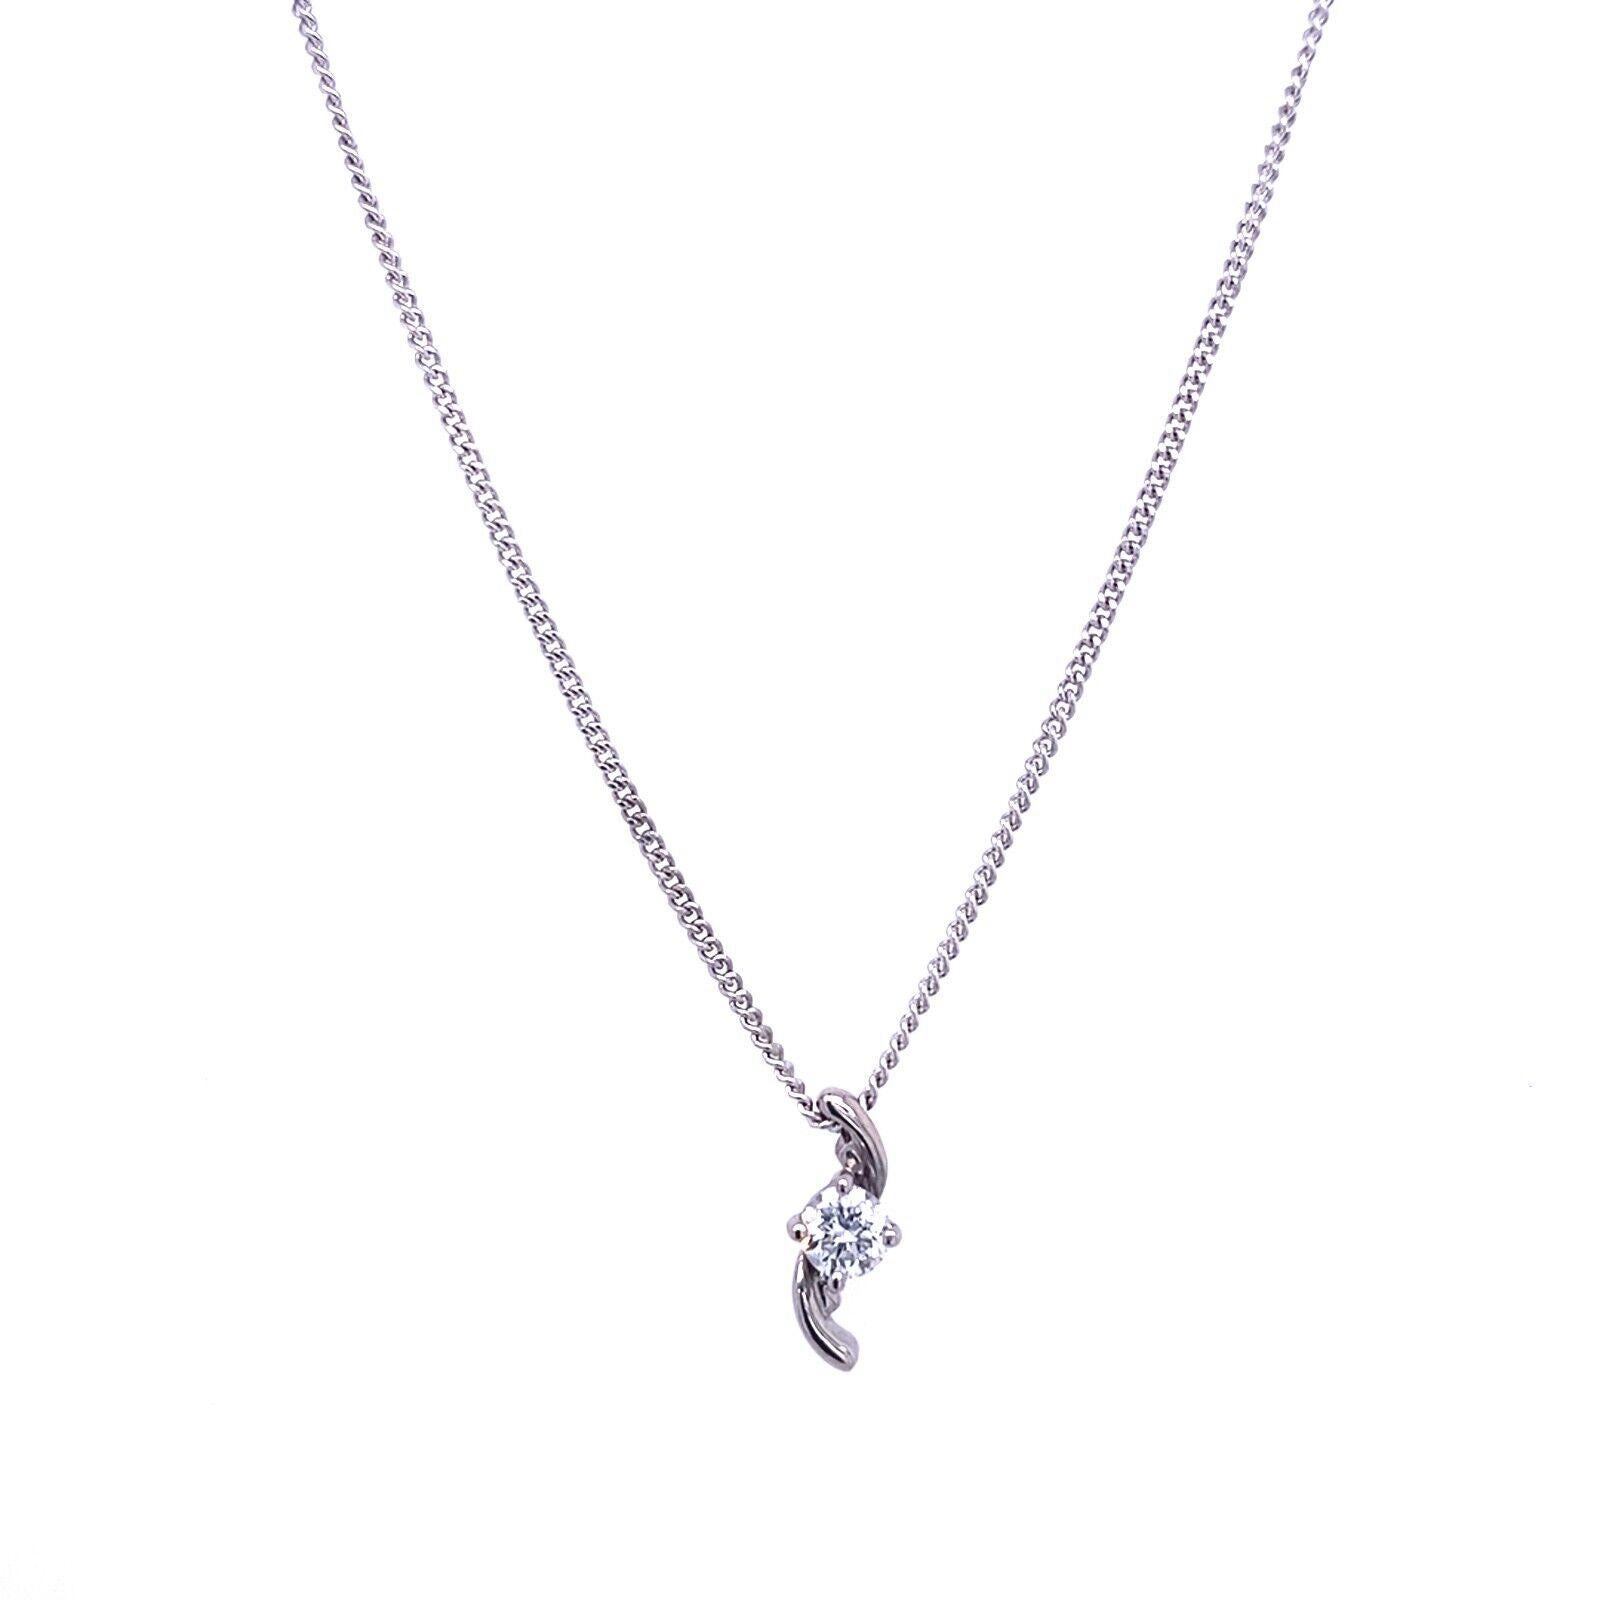 This delicate 18ct White Gold pendant features a 0.22ct VS/G Diamond,  can be worn with a 16-inch or 18-inch 18ct white gold chain. This pendant is a perfect gift for your loved ones and yourself.

Additional Information: 
Total Diamond Weight: